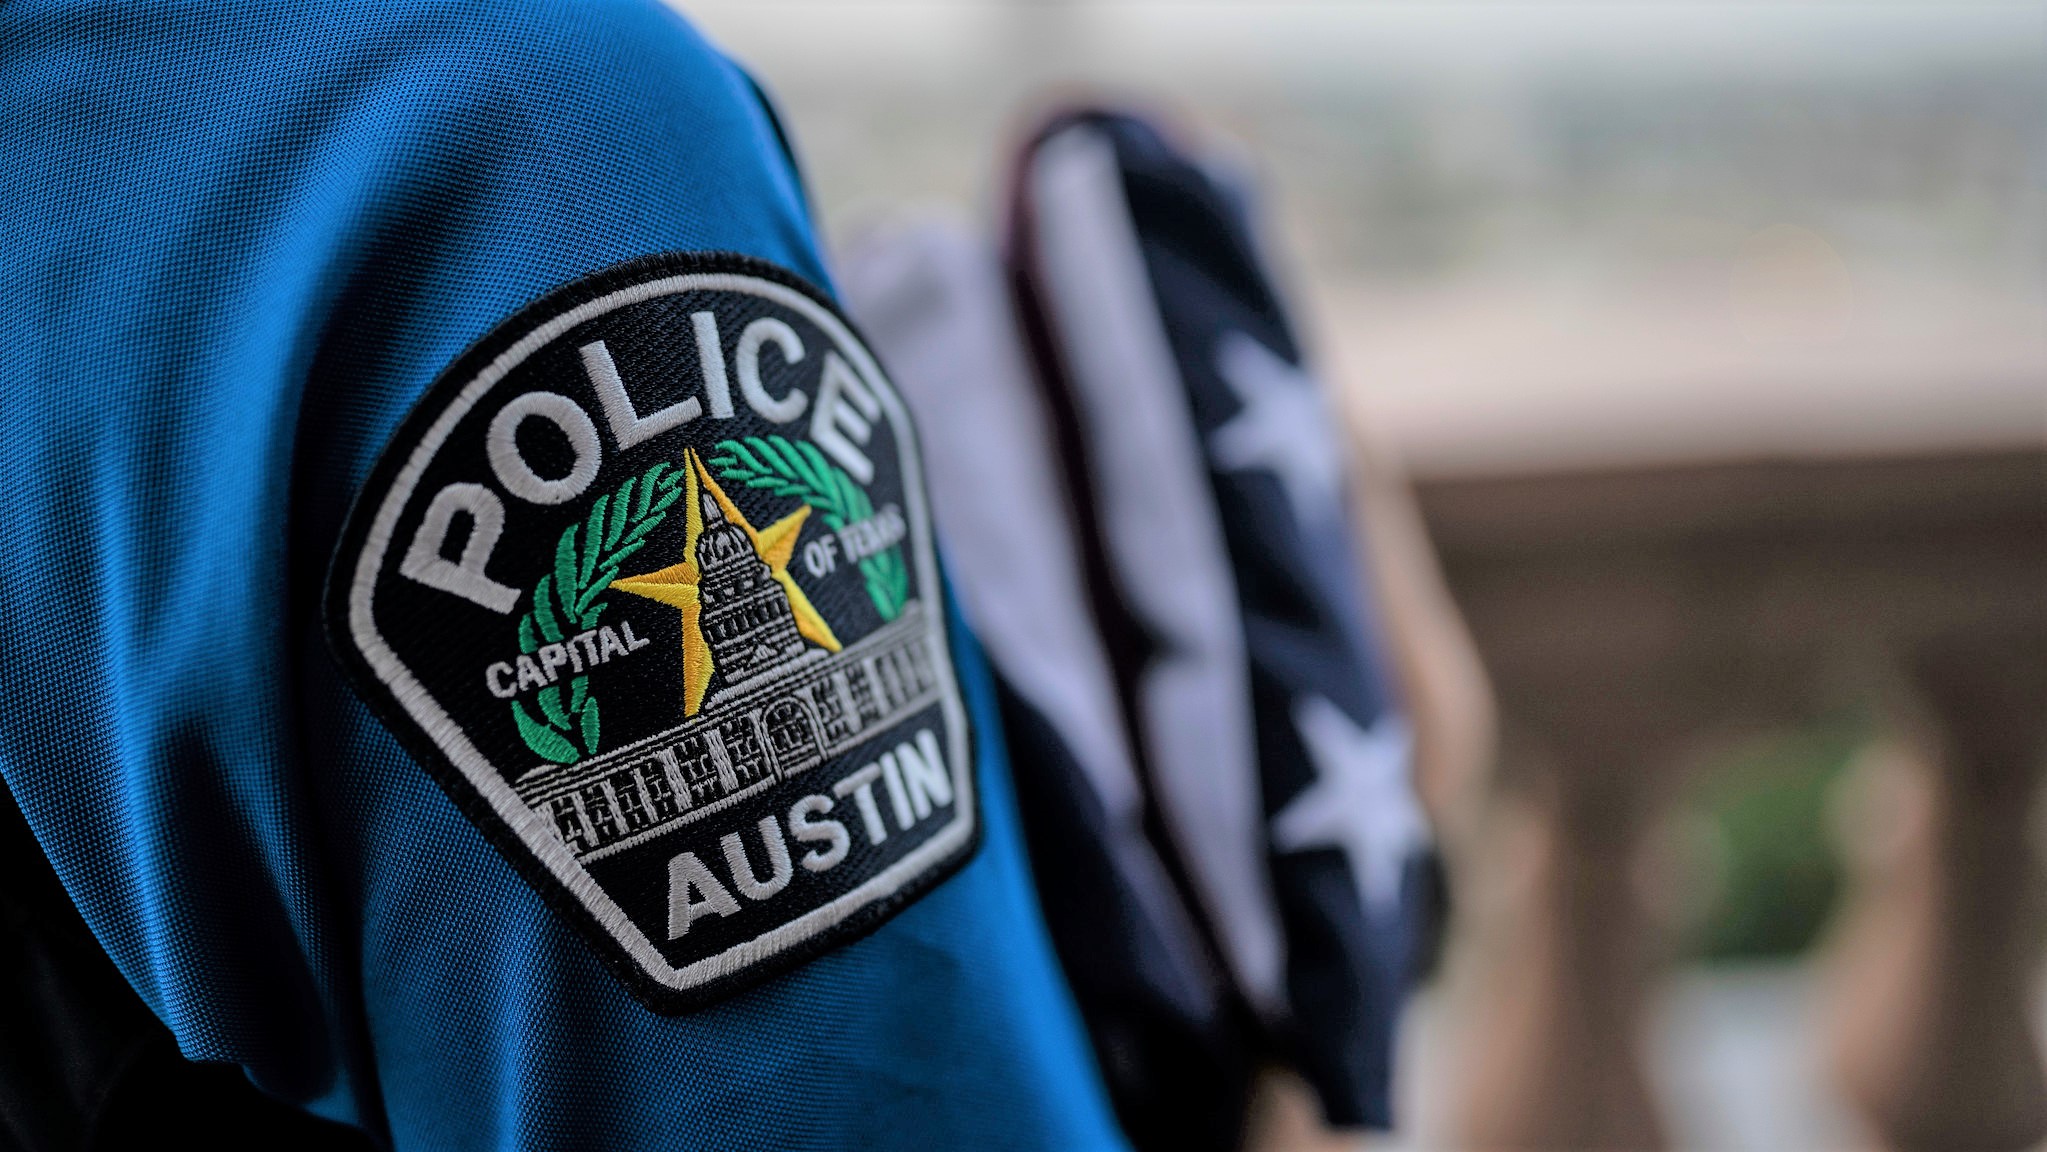 Austin Police Department patch on the arm of a shirt.